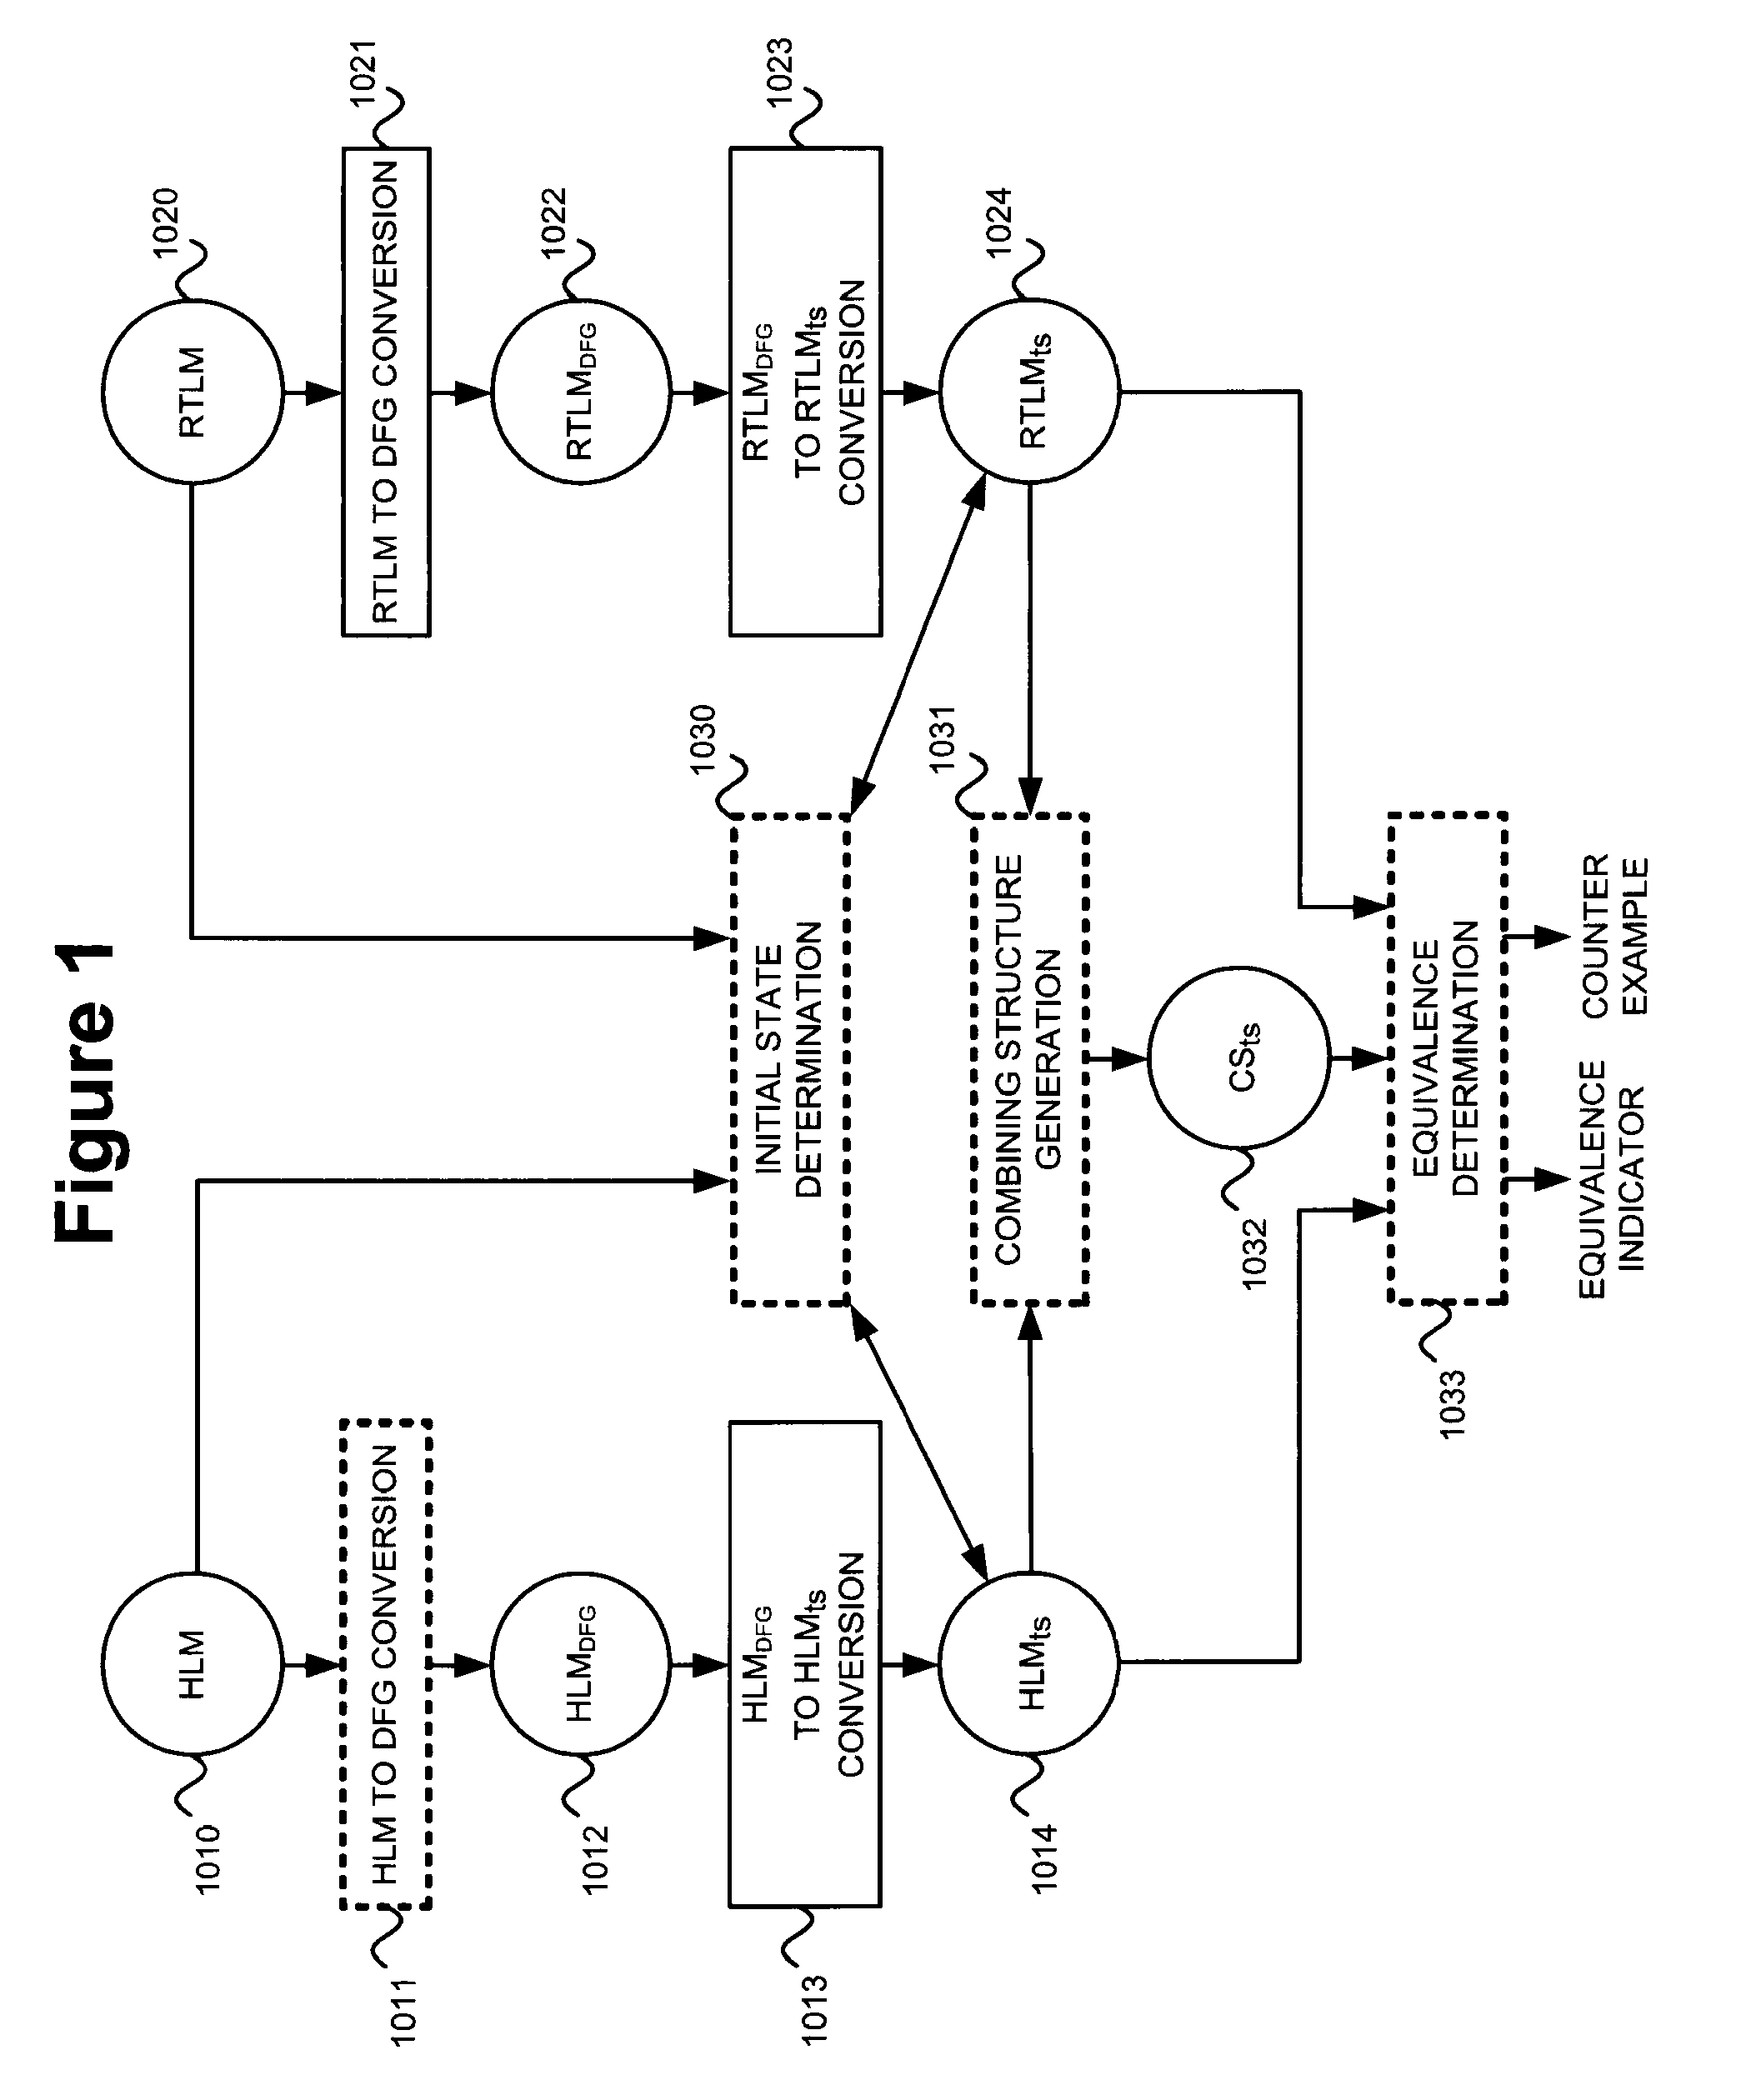 Method and apparatus for performing formal verification using data-flow graphs